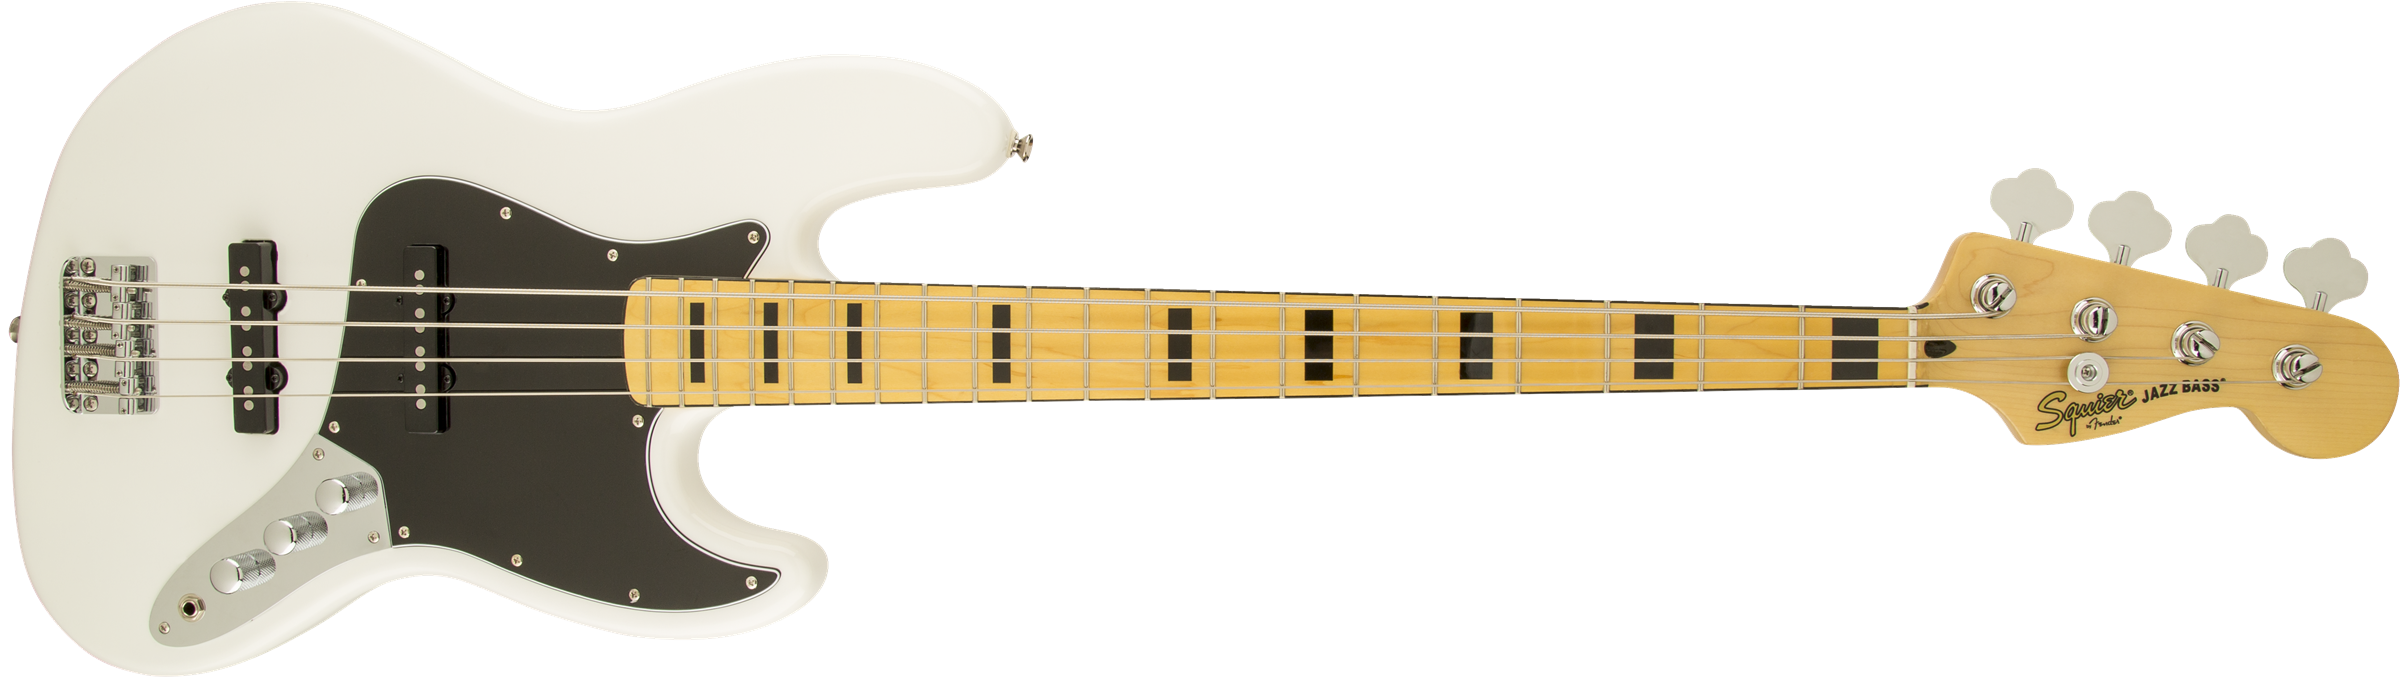 Squier Jazz Bass Vintage Modified 70 2013 Mn Olympic White - Basse Électrique Solid Body - Variation 1